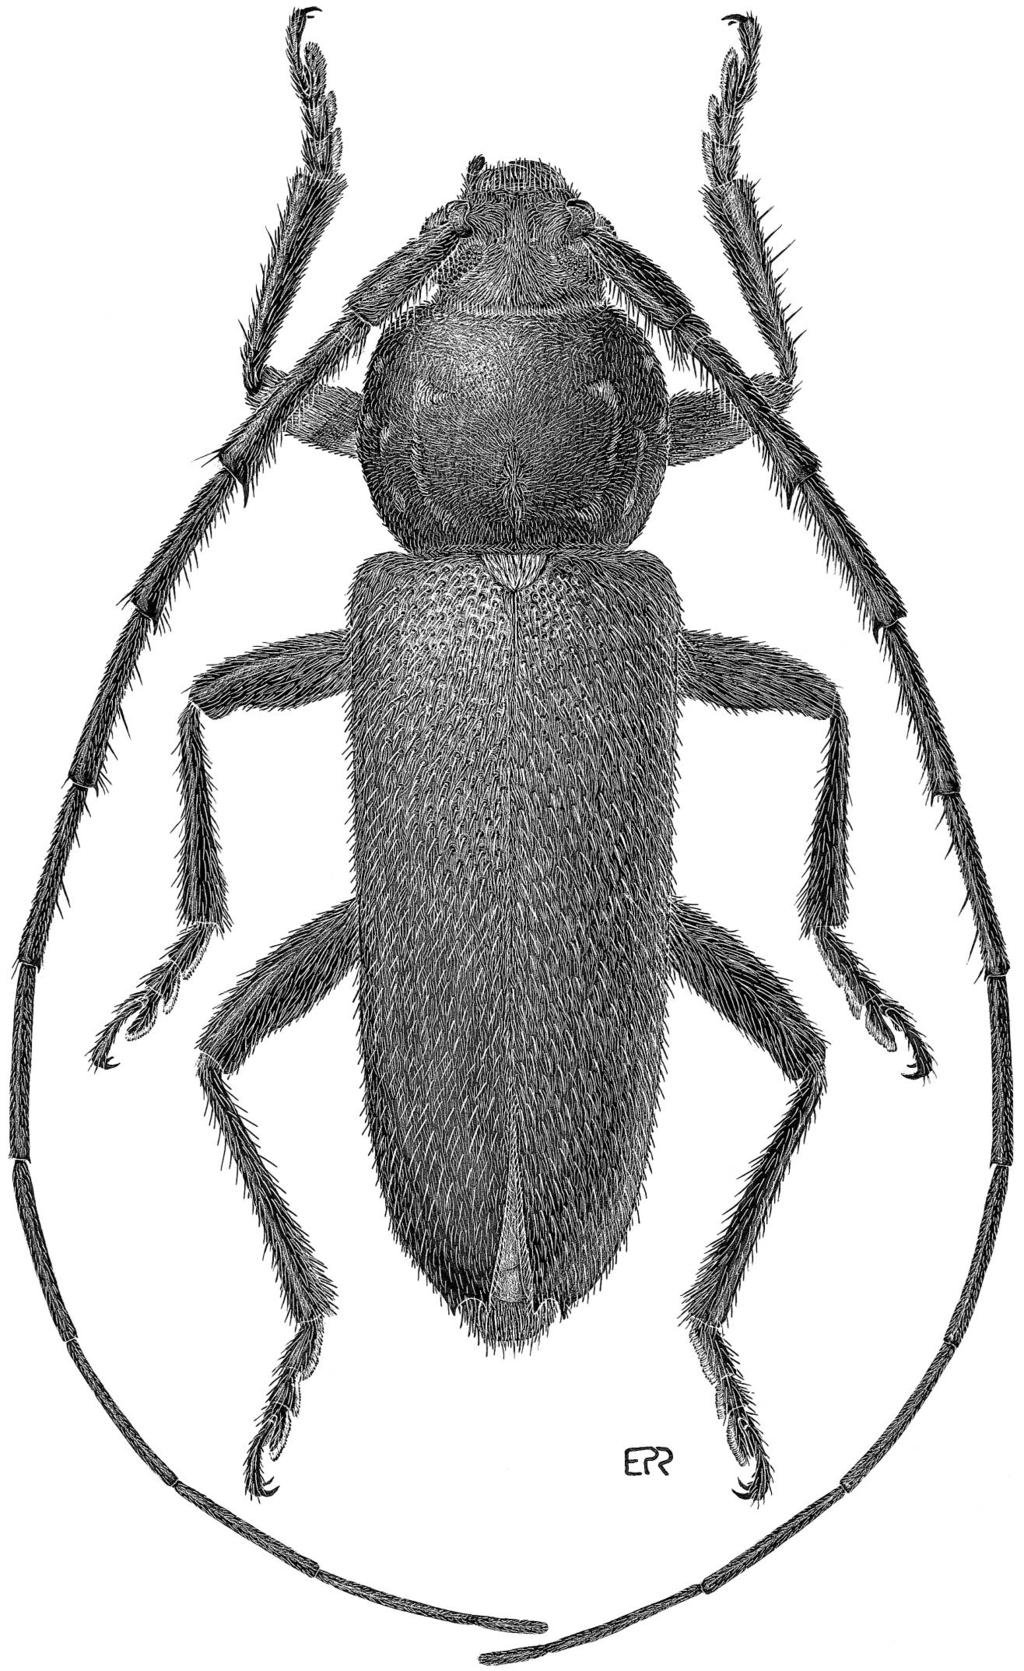 574 THE COLEOPTERISTS BULLETIN 56(4), 2002 Fig. 2. view.